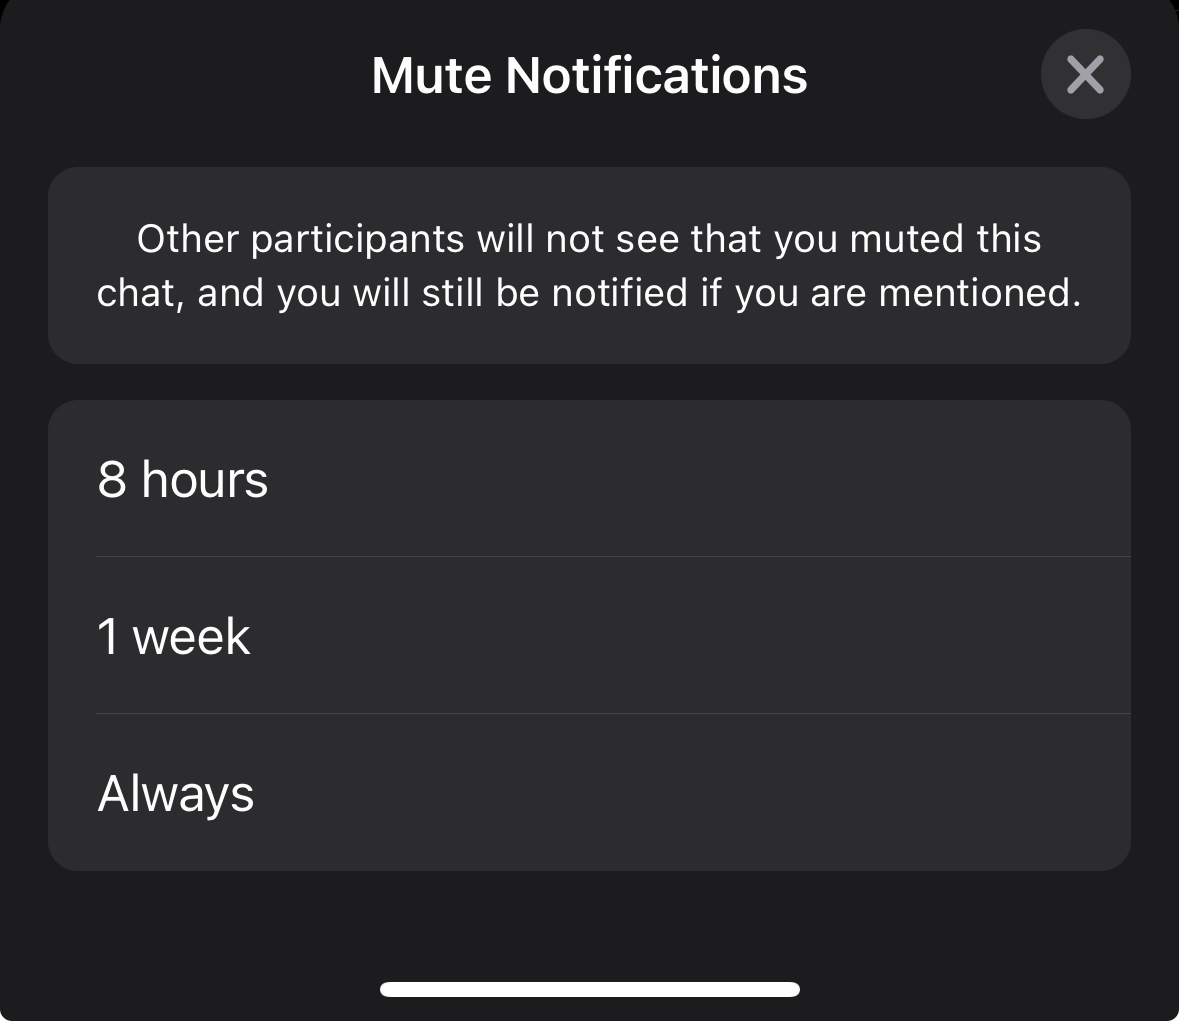 Choose between 8 hours, 1 week or Always for how long do you want to silence your group